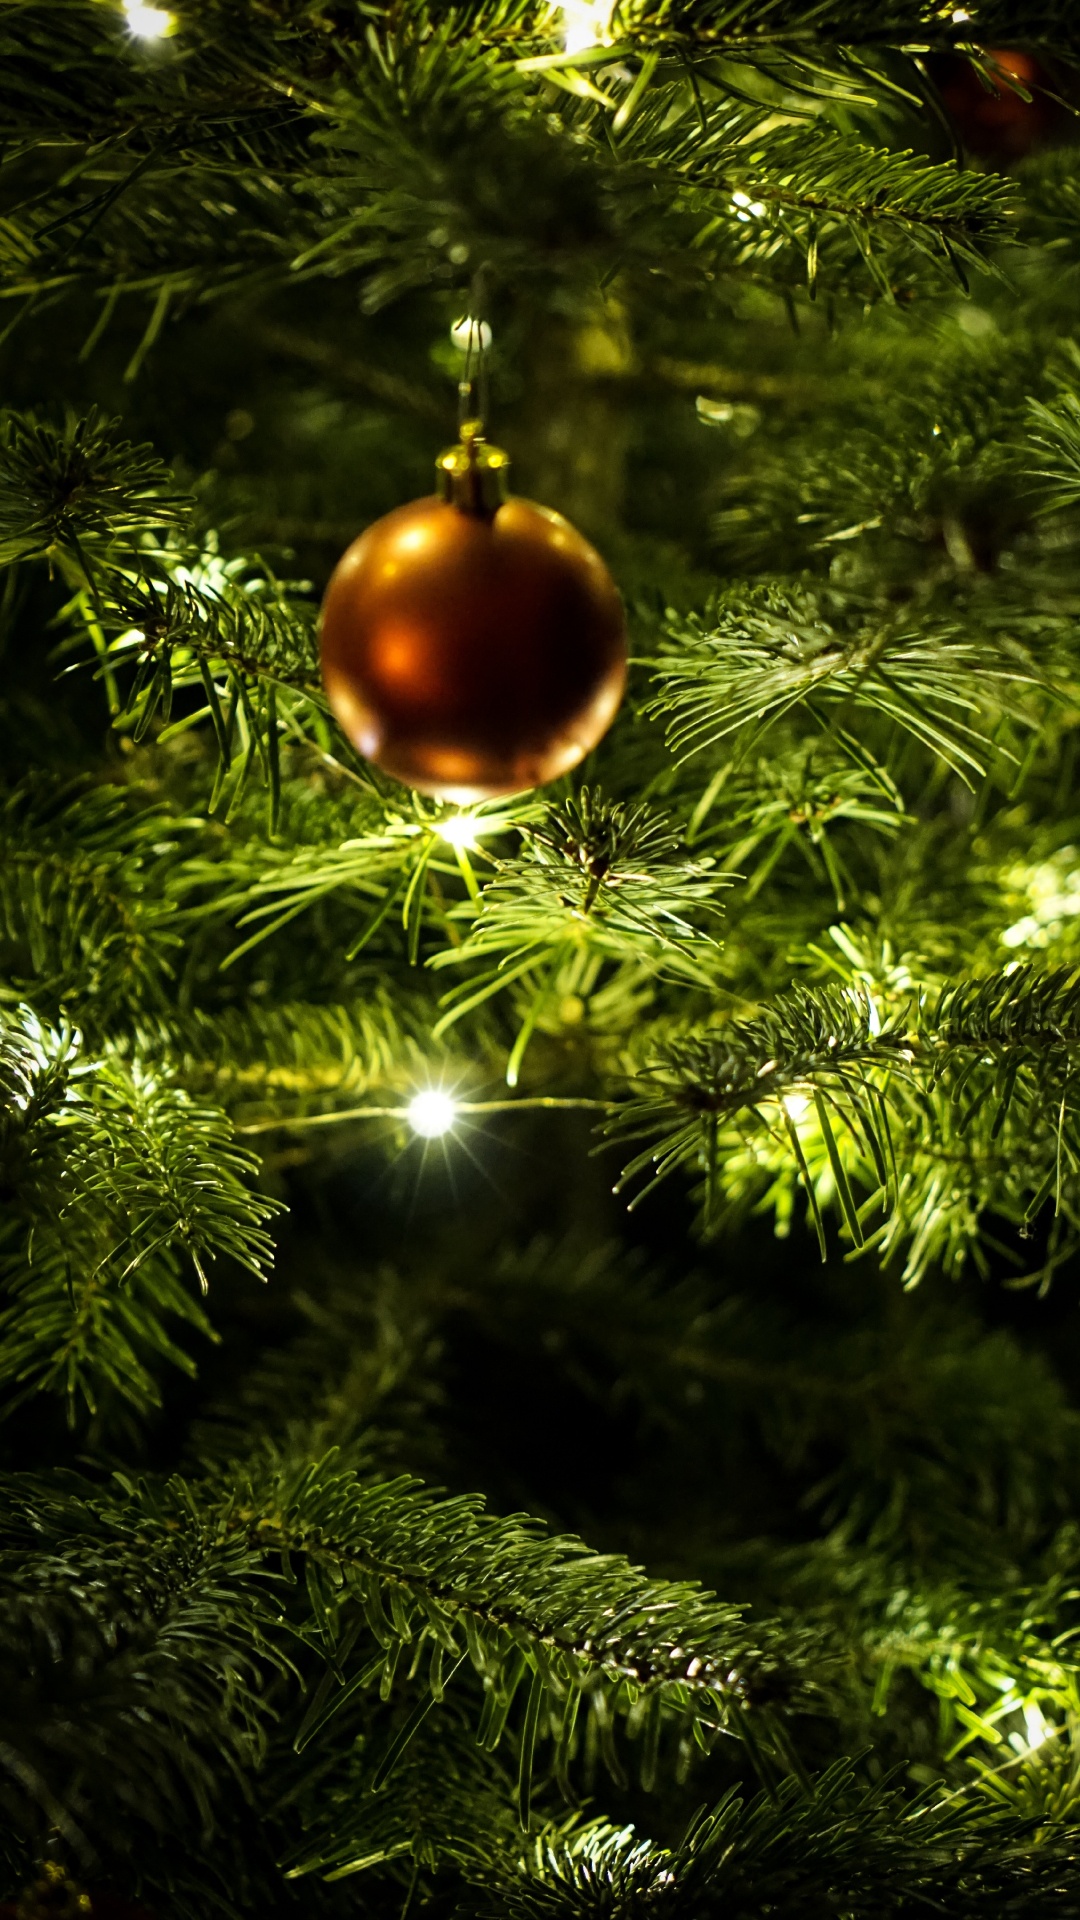 New Year, Christmas Day, Christmas Ornament, Christmas Decoration, Christmas Tree. Wallpaper in 1080x1920 Resolution